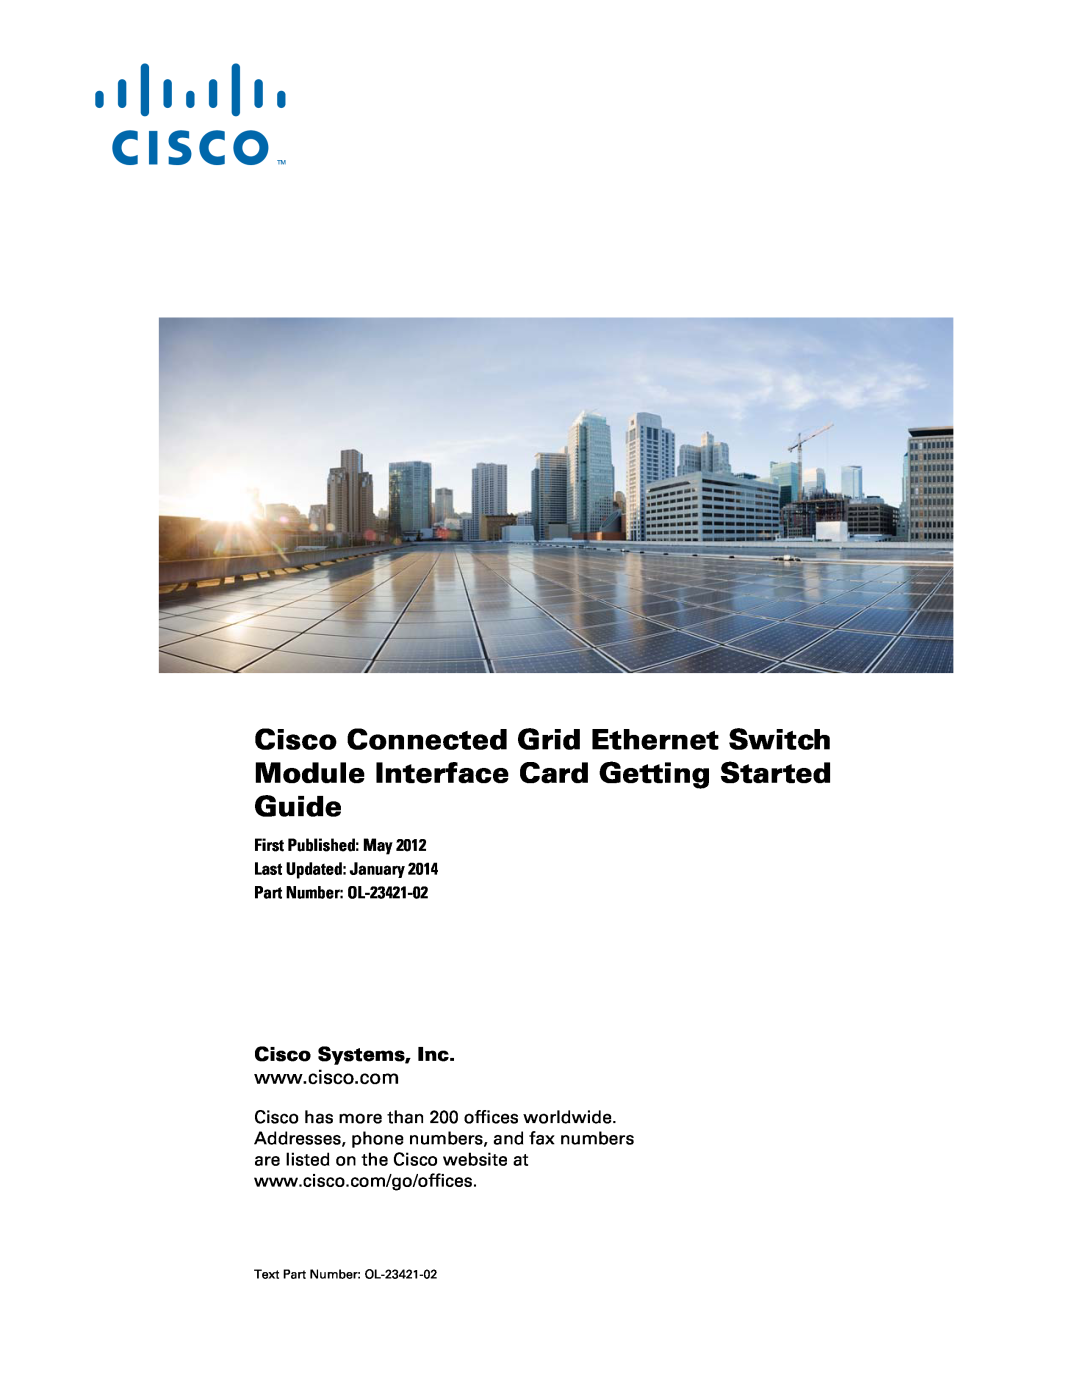 Cisco Systems manual Cisco Systems, Inc, Cisco Connected Grid Ethernet Switch, Text Part Number OL-23421-02 